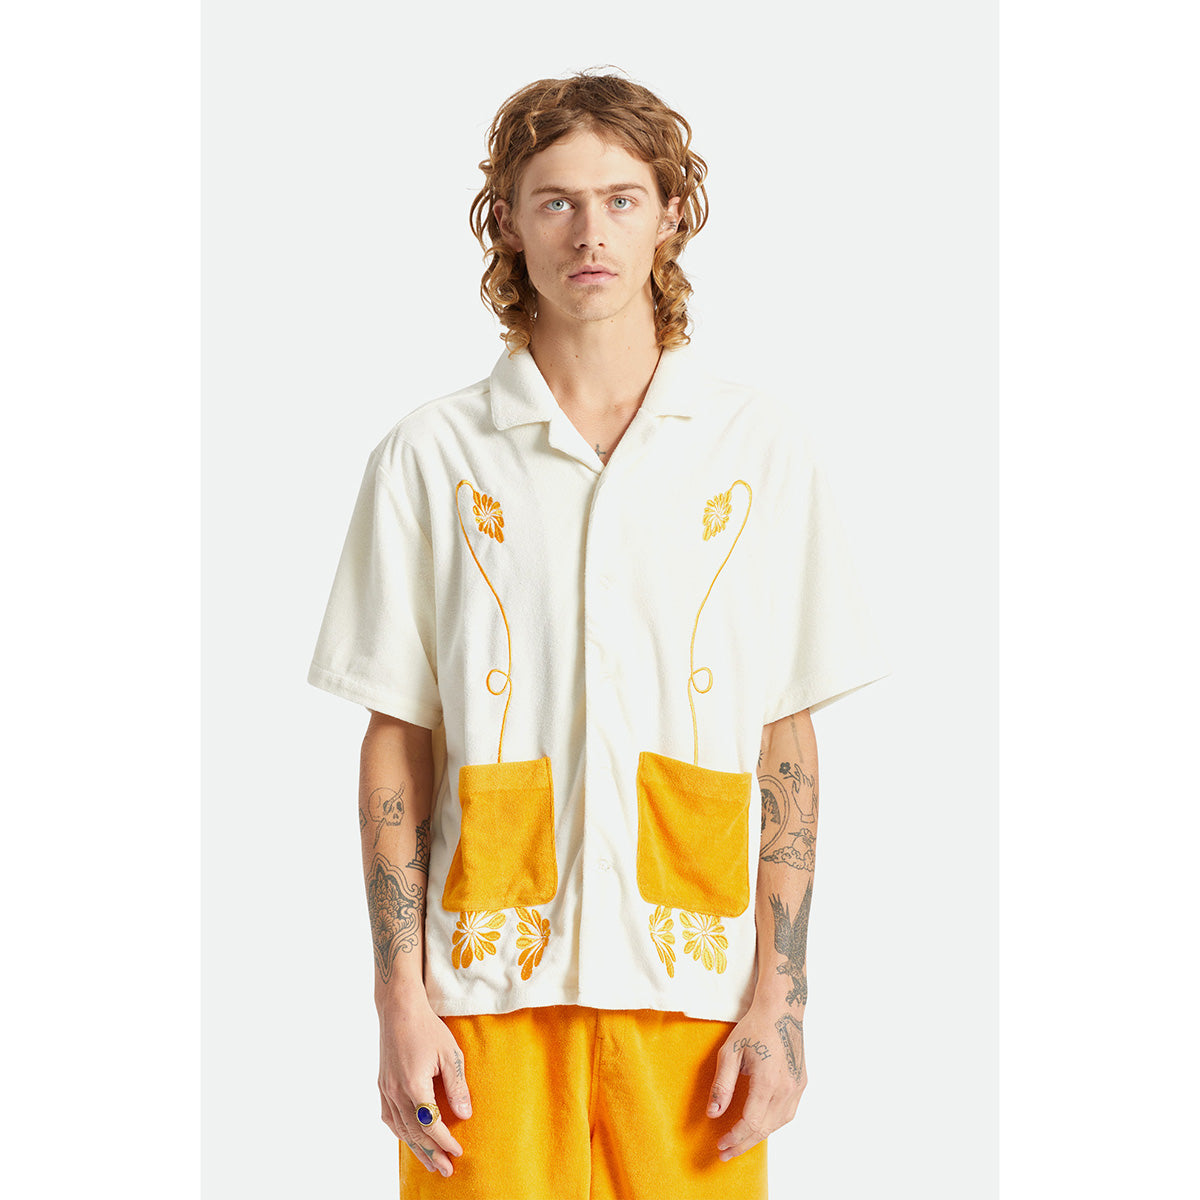 BUNKER RESERVE S/S TERRY CLOTH